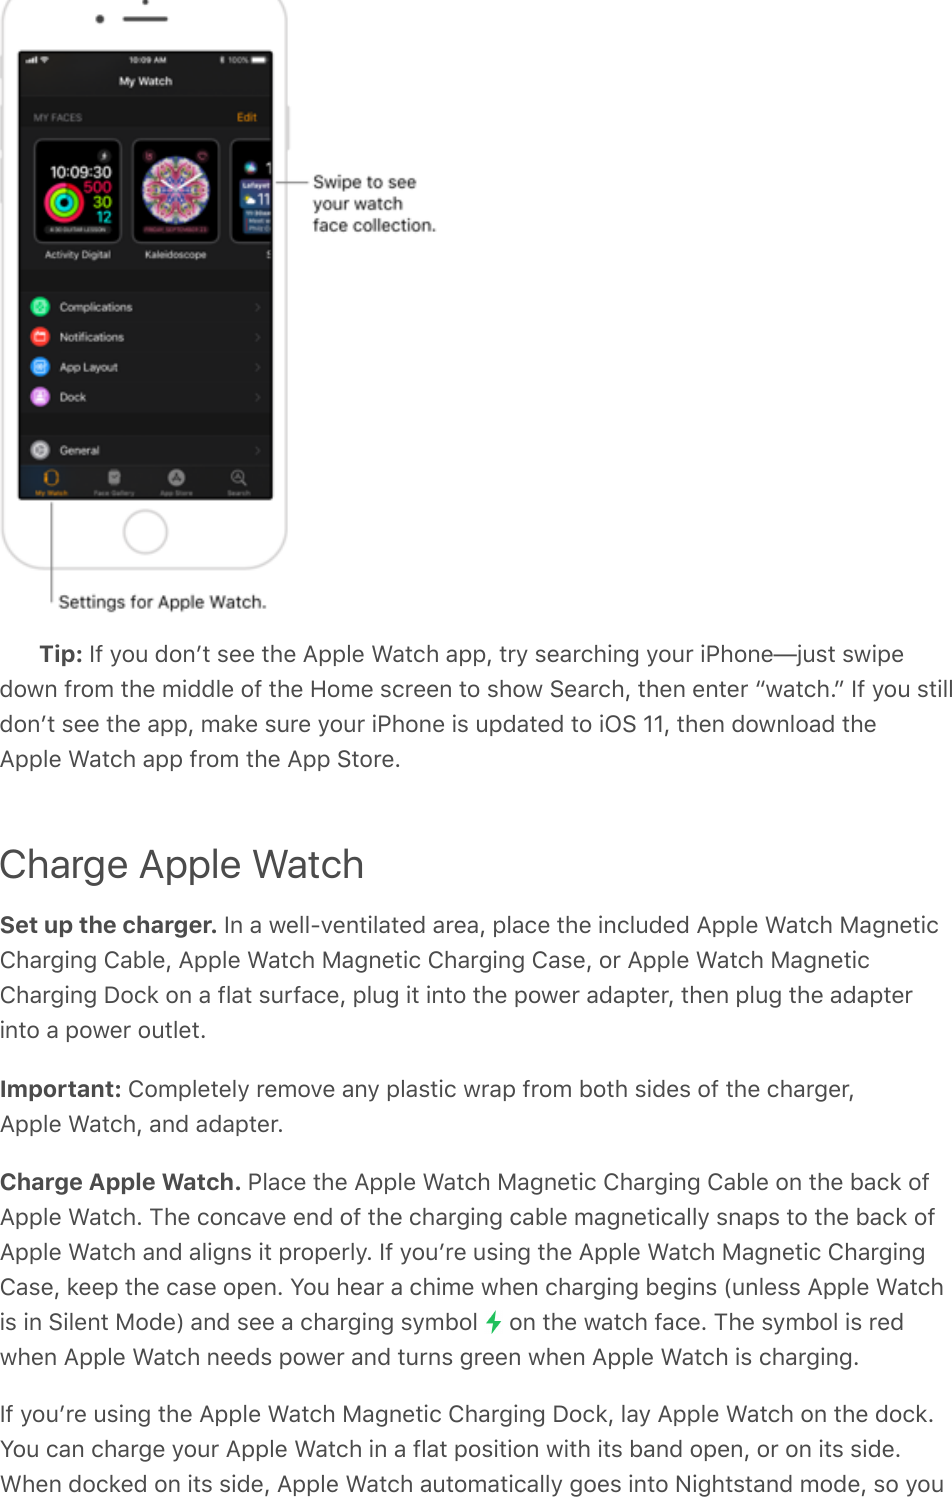 Tip: If you donʼt see the Apple Watch app, try searching your iPhone—just swipedown from the middle of the Home screen to show Search, then enter “watch.” If you stilldonʼt see the app, make sure your iPhone is updated to iOS 11, then download theApple Watch app from the App Store.Charge Apple WatchSet up the charger. In a well-ventilated area, place the included Apple Watch MagneticCharging Cable, Apple Watch Magnetic Charging Case, or Apple Watch MagneticCharging Dock on a flat surface, plug it into the power adapter, then plug the adapterinto a power outlet.Important: Completely remove any plastic wrap from both sides of the charger,Apple Watch, and adapter.Charge Apple Watch. Place the Apple Watch Magnetic Charging Cable on the back ofApple Watch. The concave end of the charging cable magnetically snaps to the back ofApple Watch and aligns it properly. If youʼre using the Apple Watch Magnetic ChargingCase, keep the case open. You hear a chime when charging begins (unless Apple Watchis in Silent Mode) and see a charging symbol   on the watch face. The symbol is redwhen Apple Watch needs power and turns green when Apple Watch is charging.If youʼre using the Apple Watch Magnetic Charging Dock, lay Apple Watch on the dock.You can charge your Apple Watch in a flat position with its band open, or on its side.When docked on its side, Apple Watch automatically goes into Nightstand mode, so you